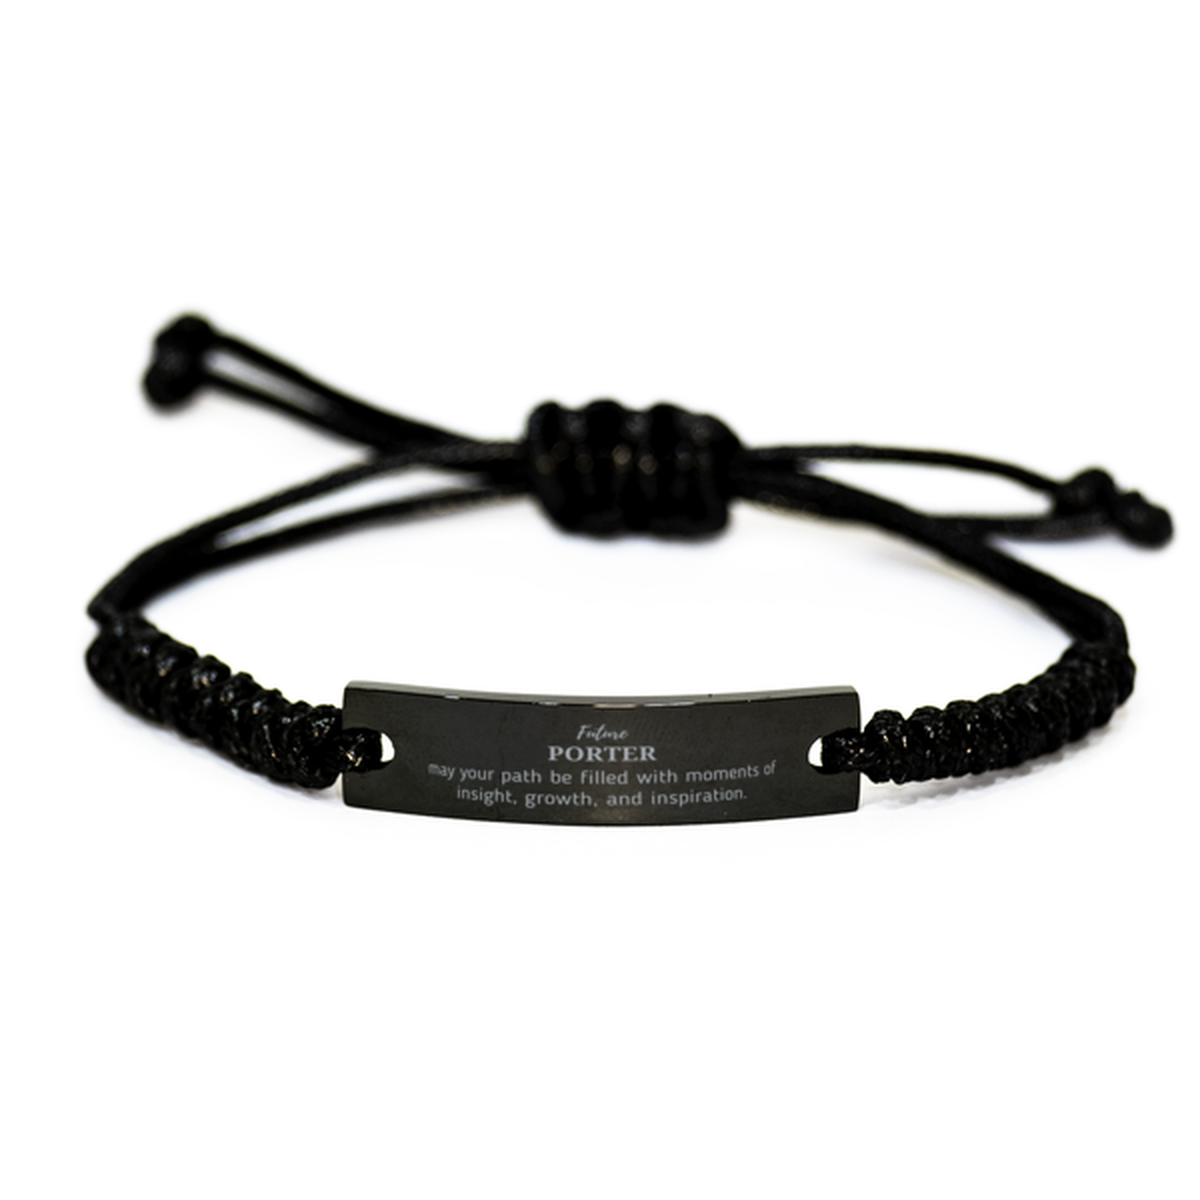 Future Porter Gifts, May your path be filled with moments of insight, Graduation Gifts for New Porter, Christmas Unique Black Rope Bracelet For Men, Women, Friends